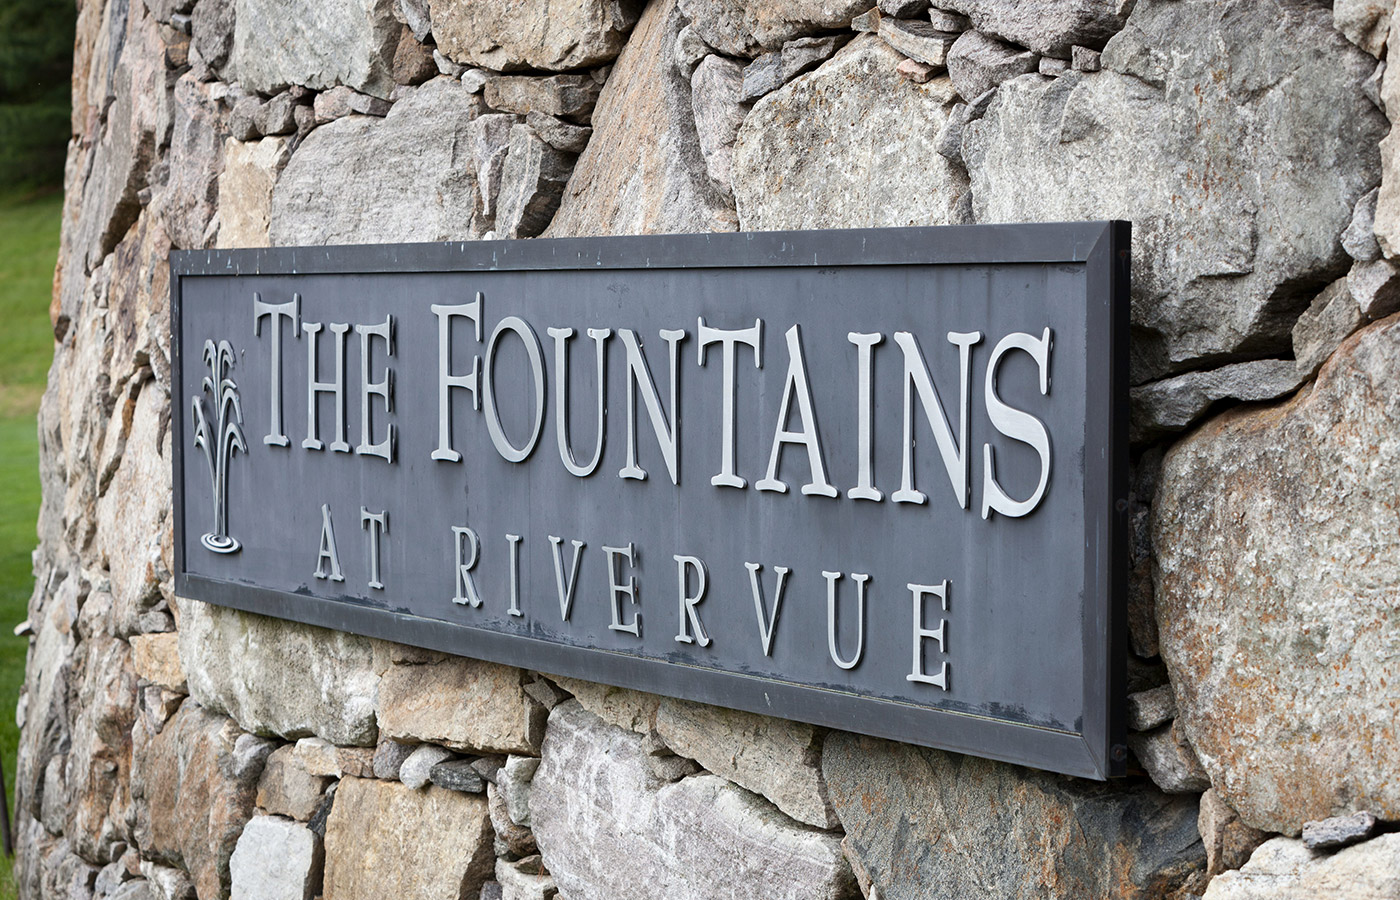 The Fountains at RiverVue exterior building signage.